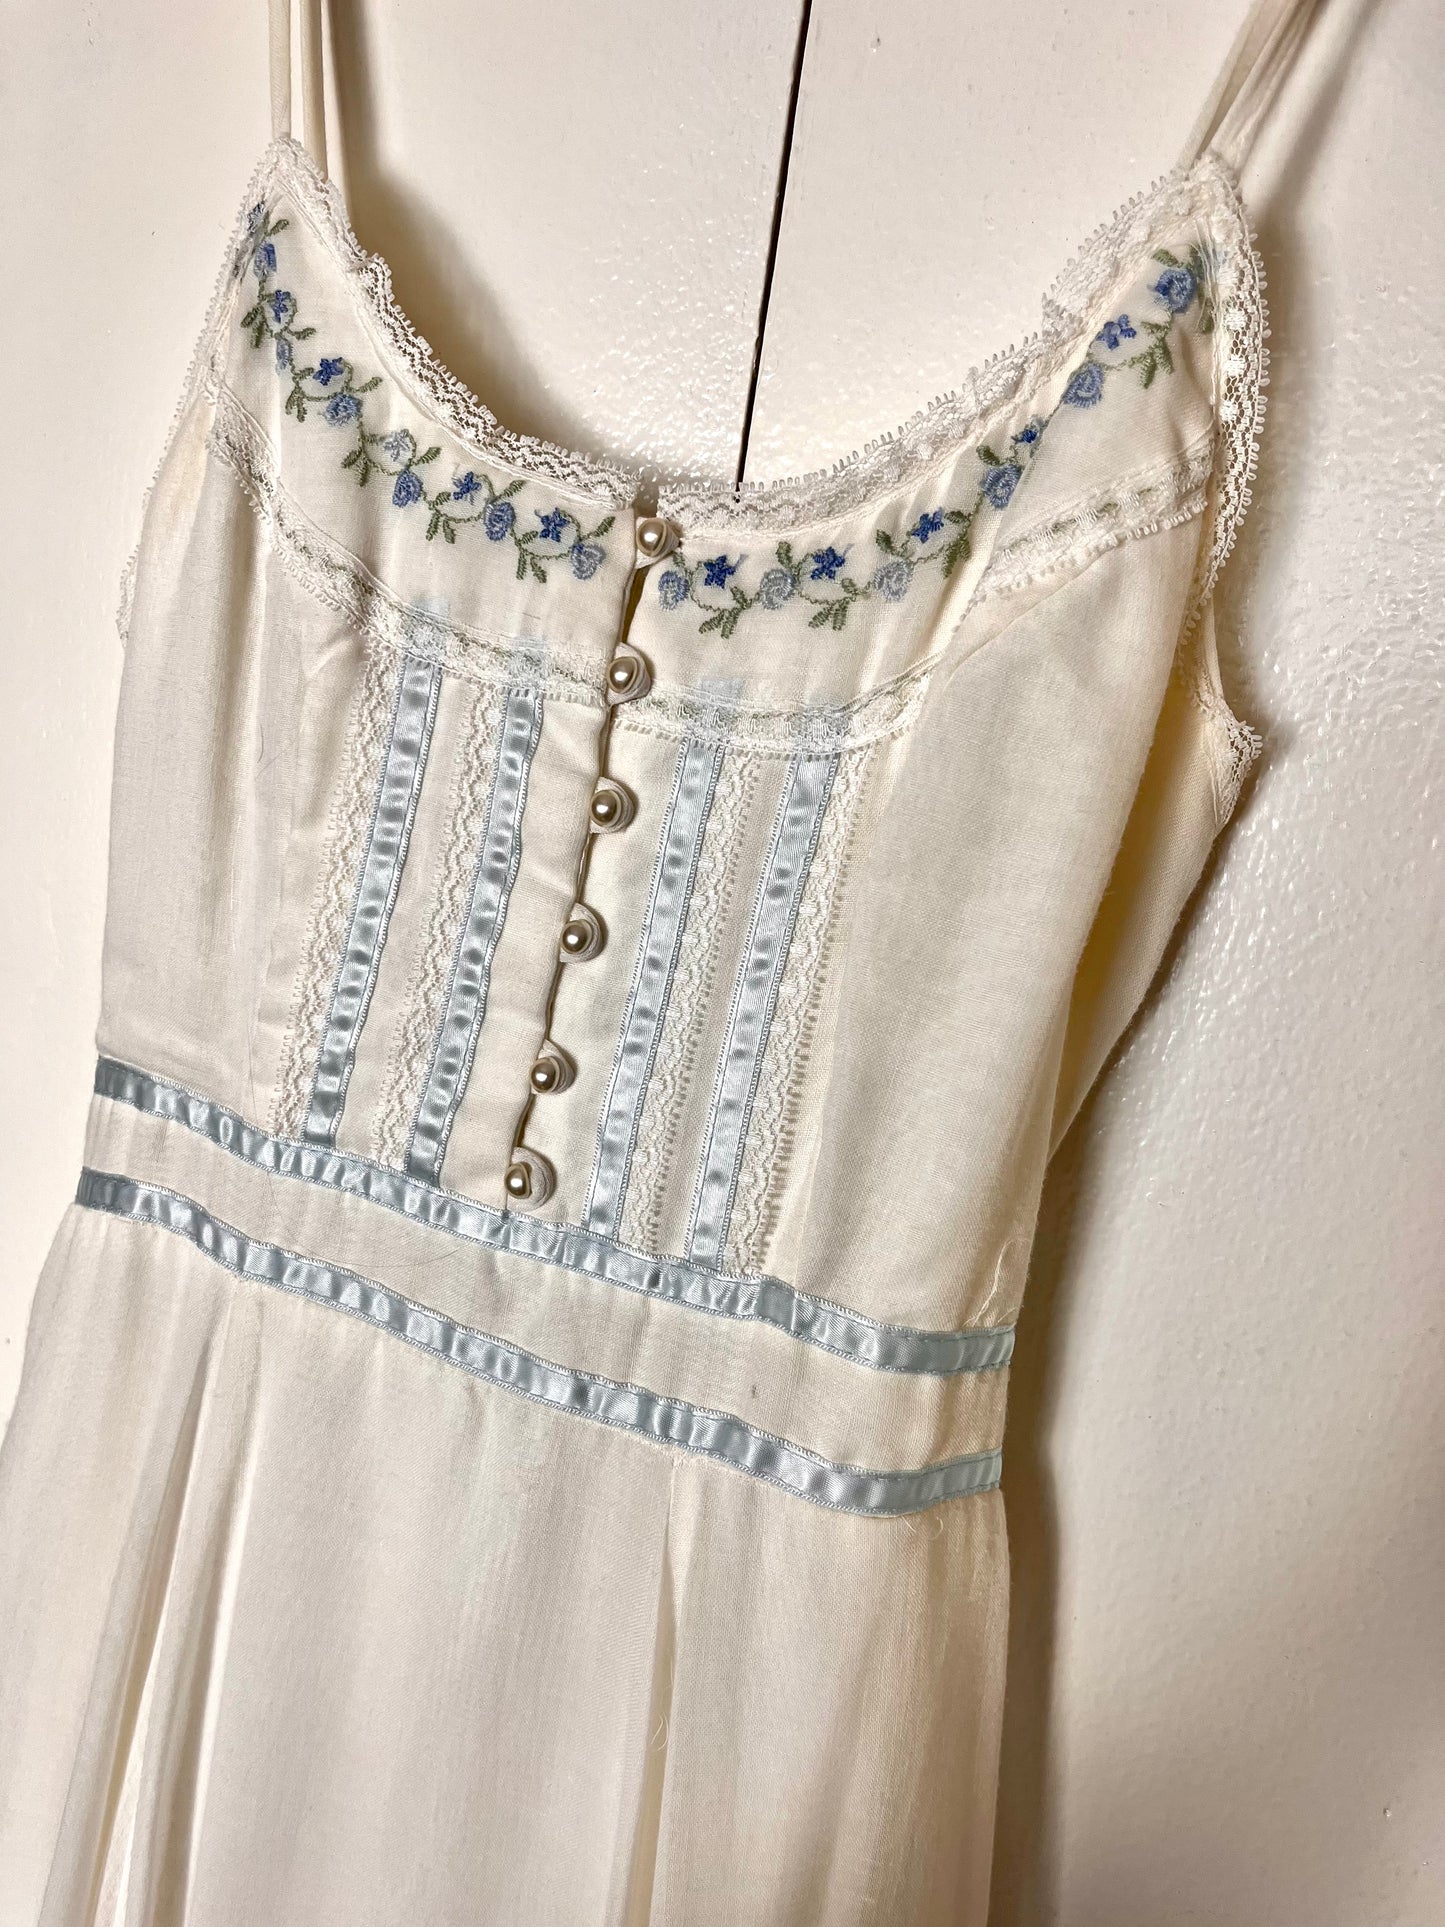 Vintage 1970's "Gunne Sax by Jessica McClintock" White with Blue Flowers Button-Front Maxi Sundress